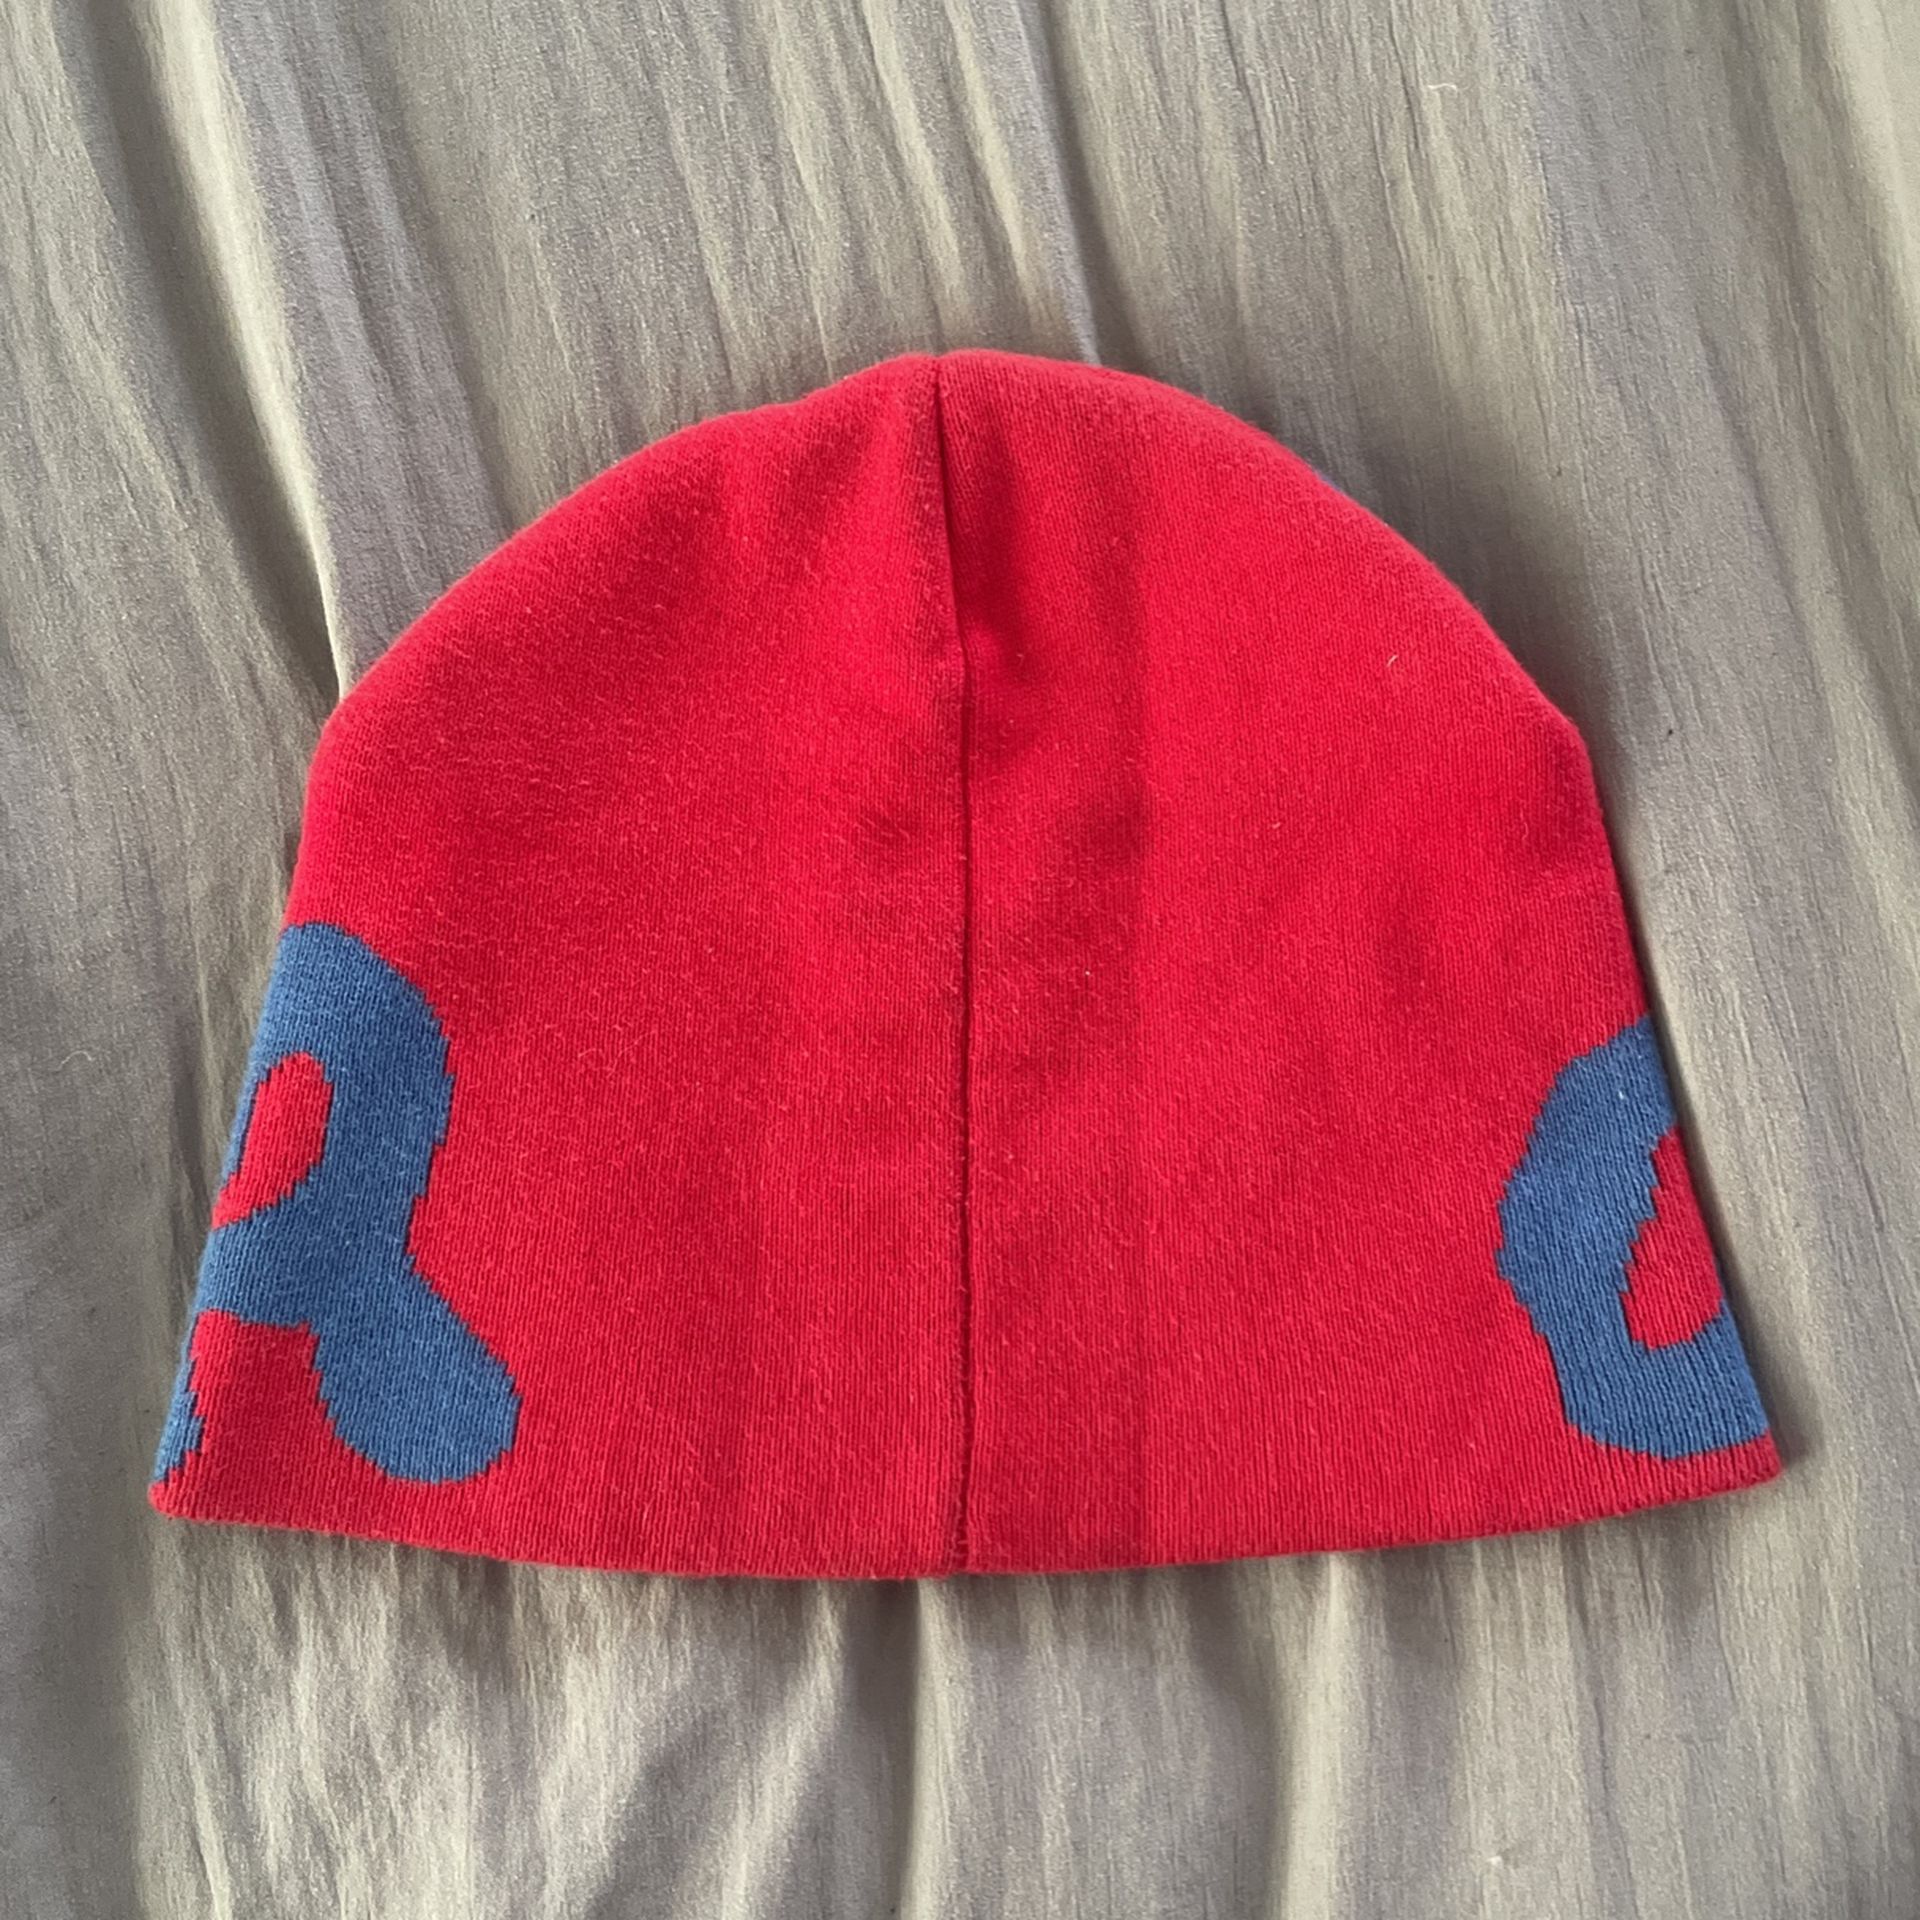 LV BEANIE HAT for Sale in Clifton, NJ - OfferUp